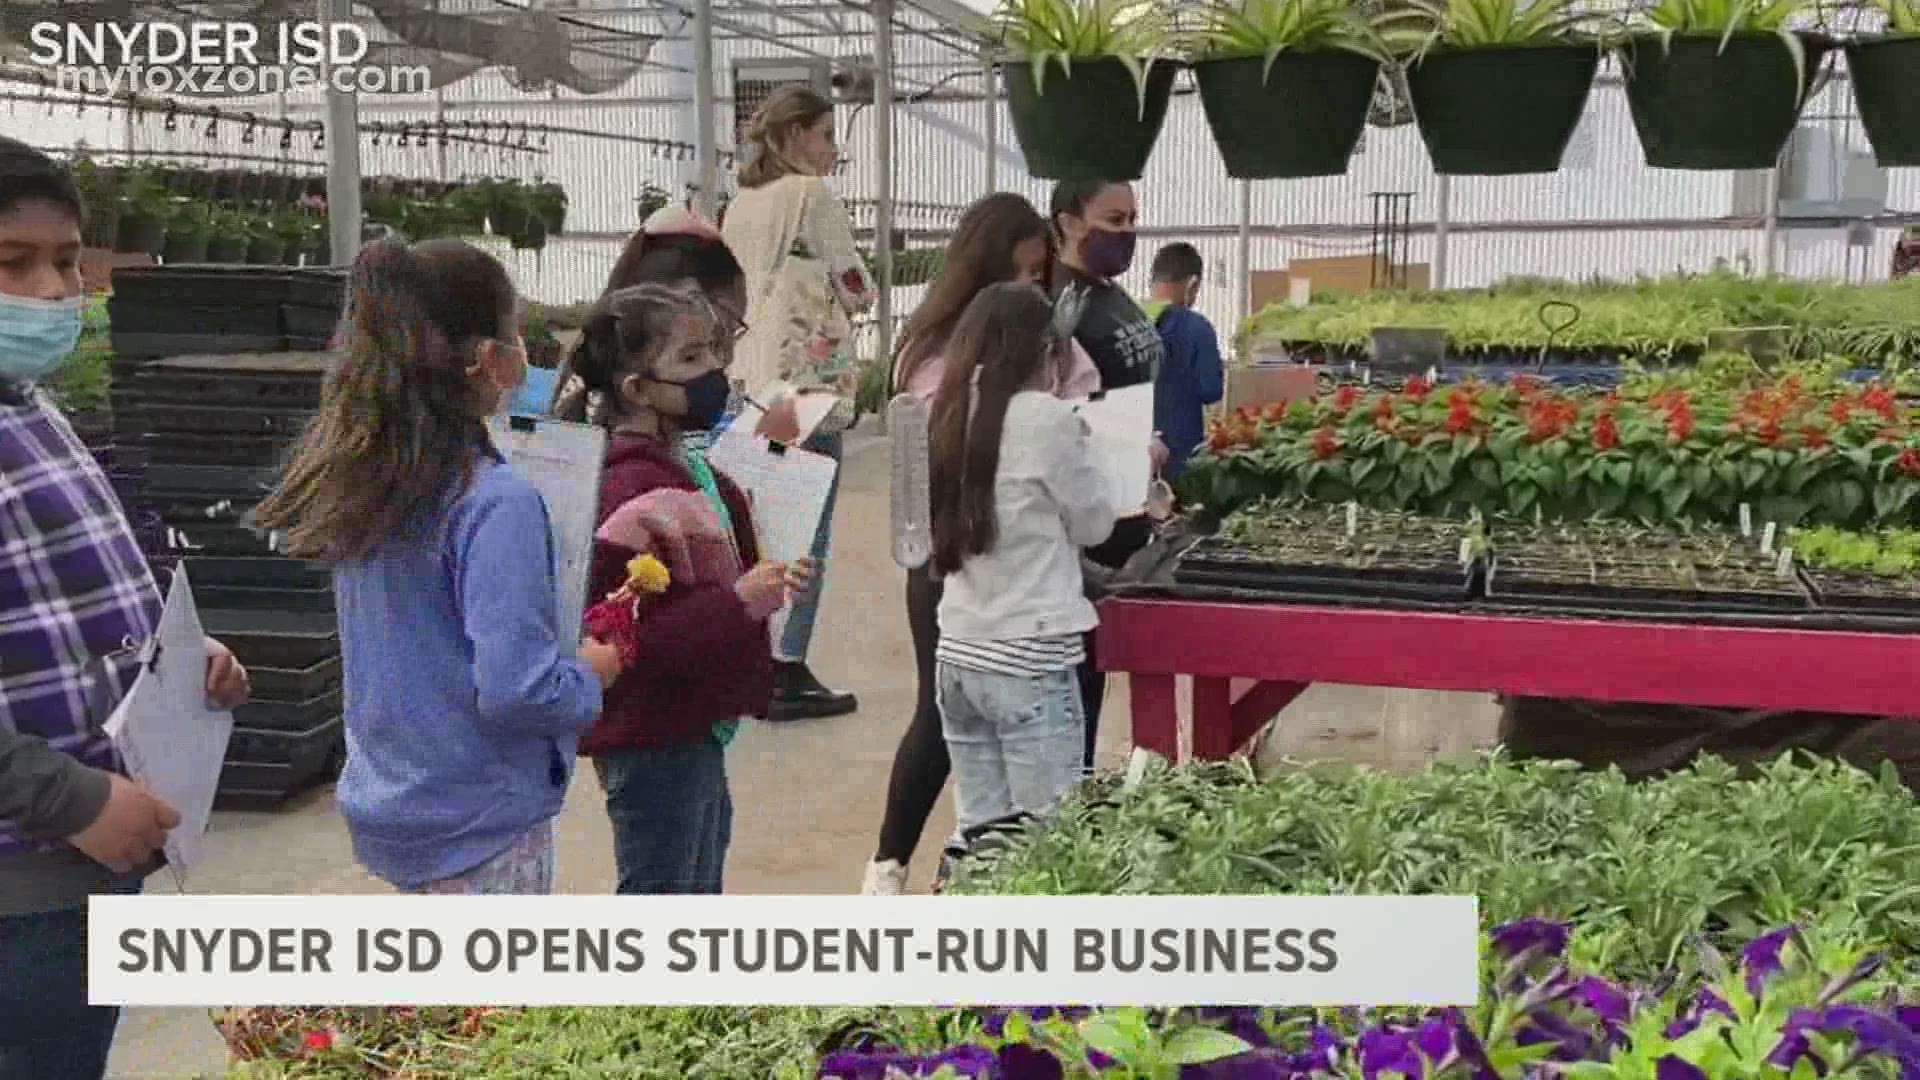 The 10,000-square-foot greenhouse will be used as a retail store completely run by interns. The ribbon cutting will be held 9 a.m. Saturday.